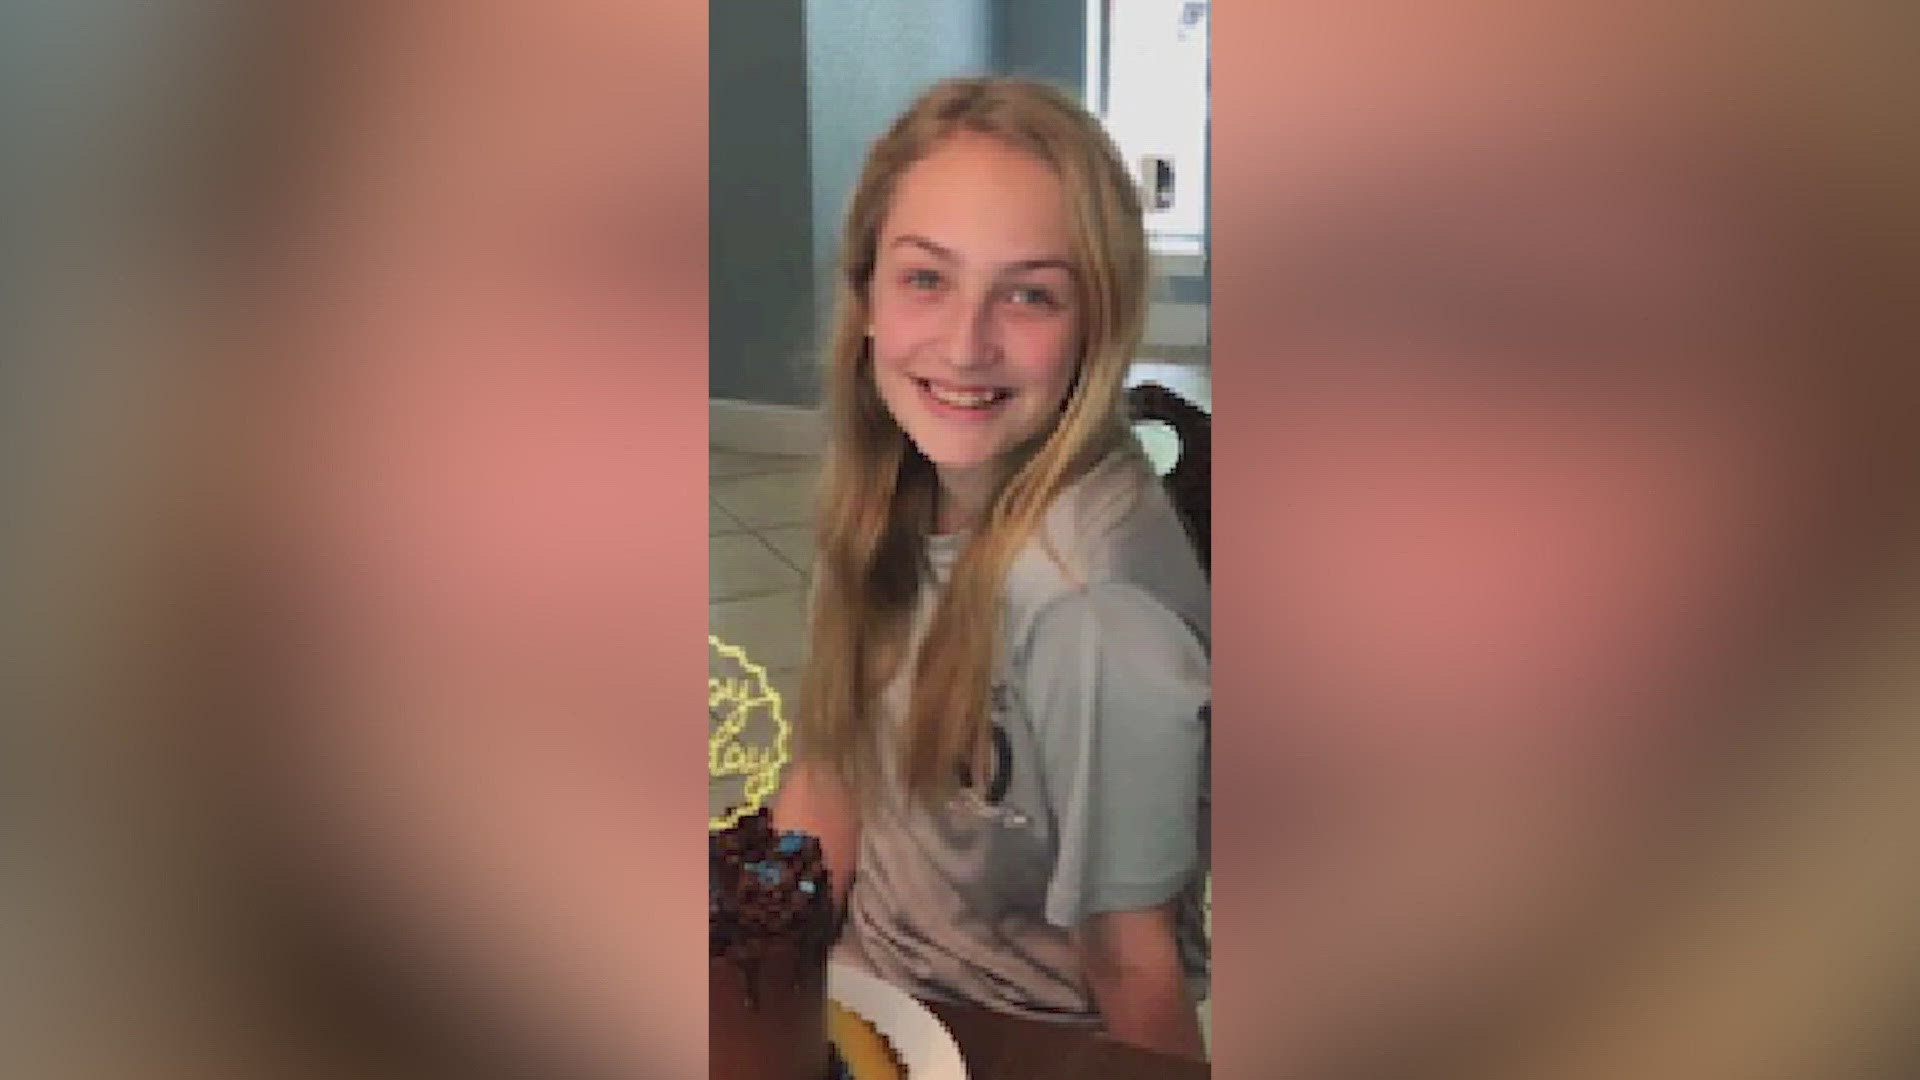 Police Asking For Your Help Finding Missing Teenage Girl